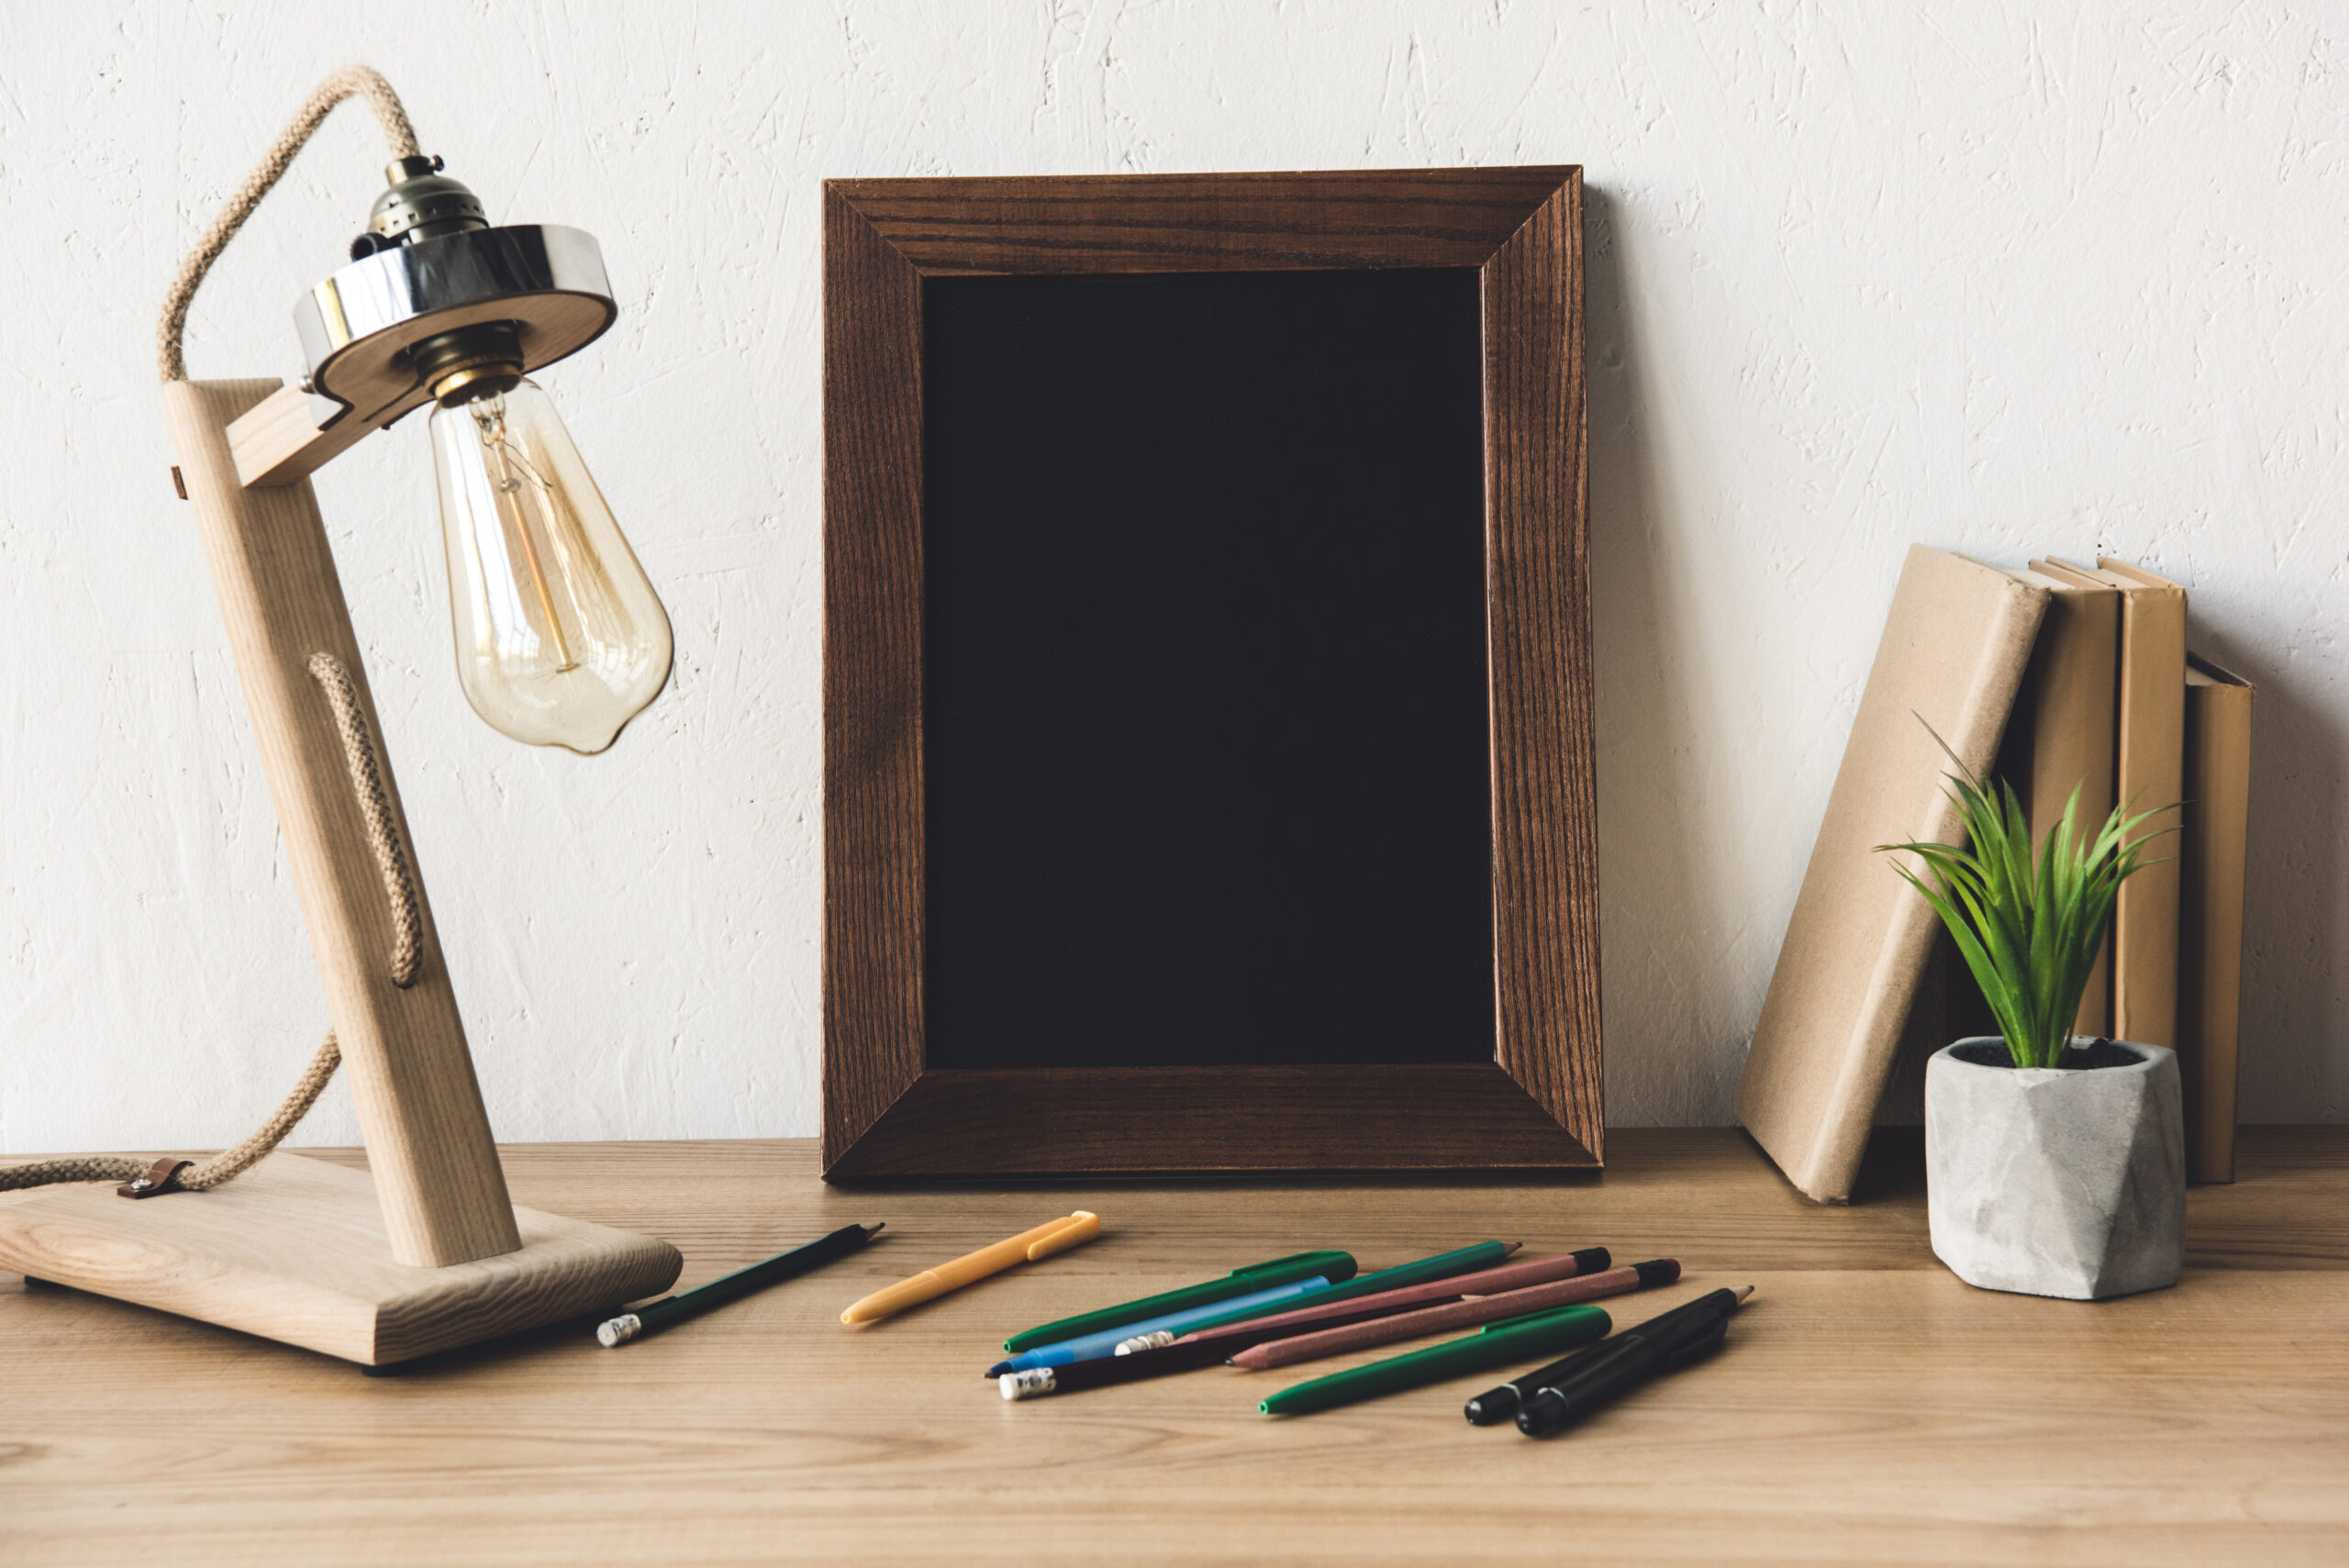 close up view of empty photo frame, table lamp and office supplies on table